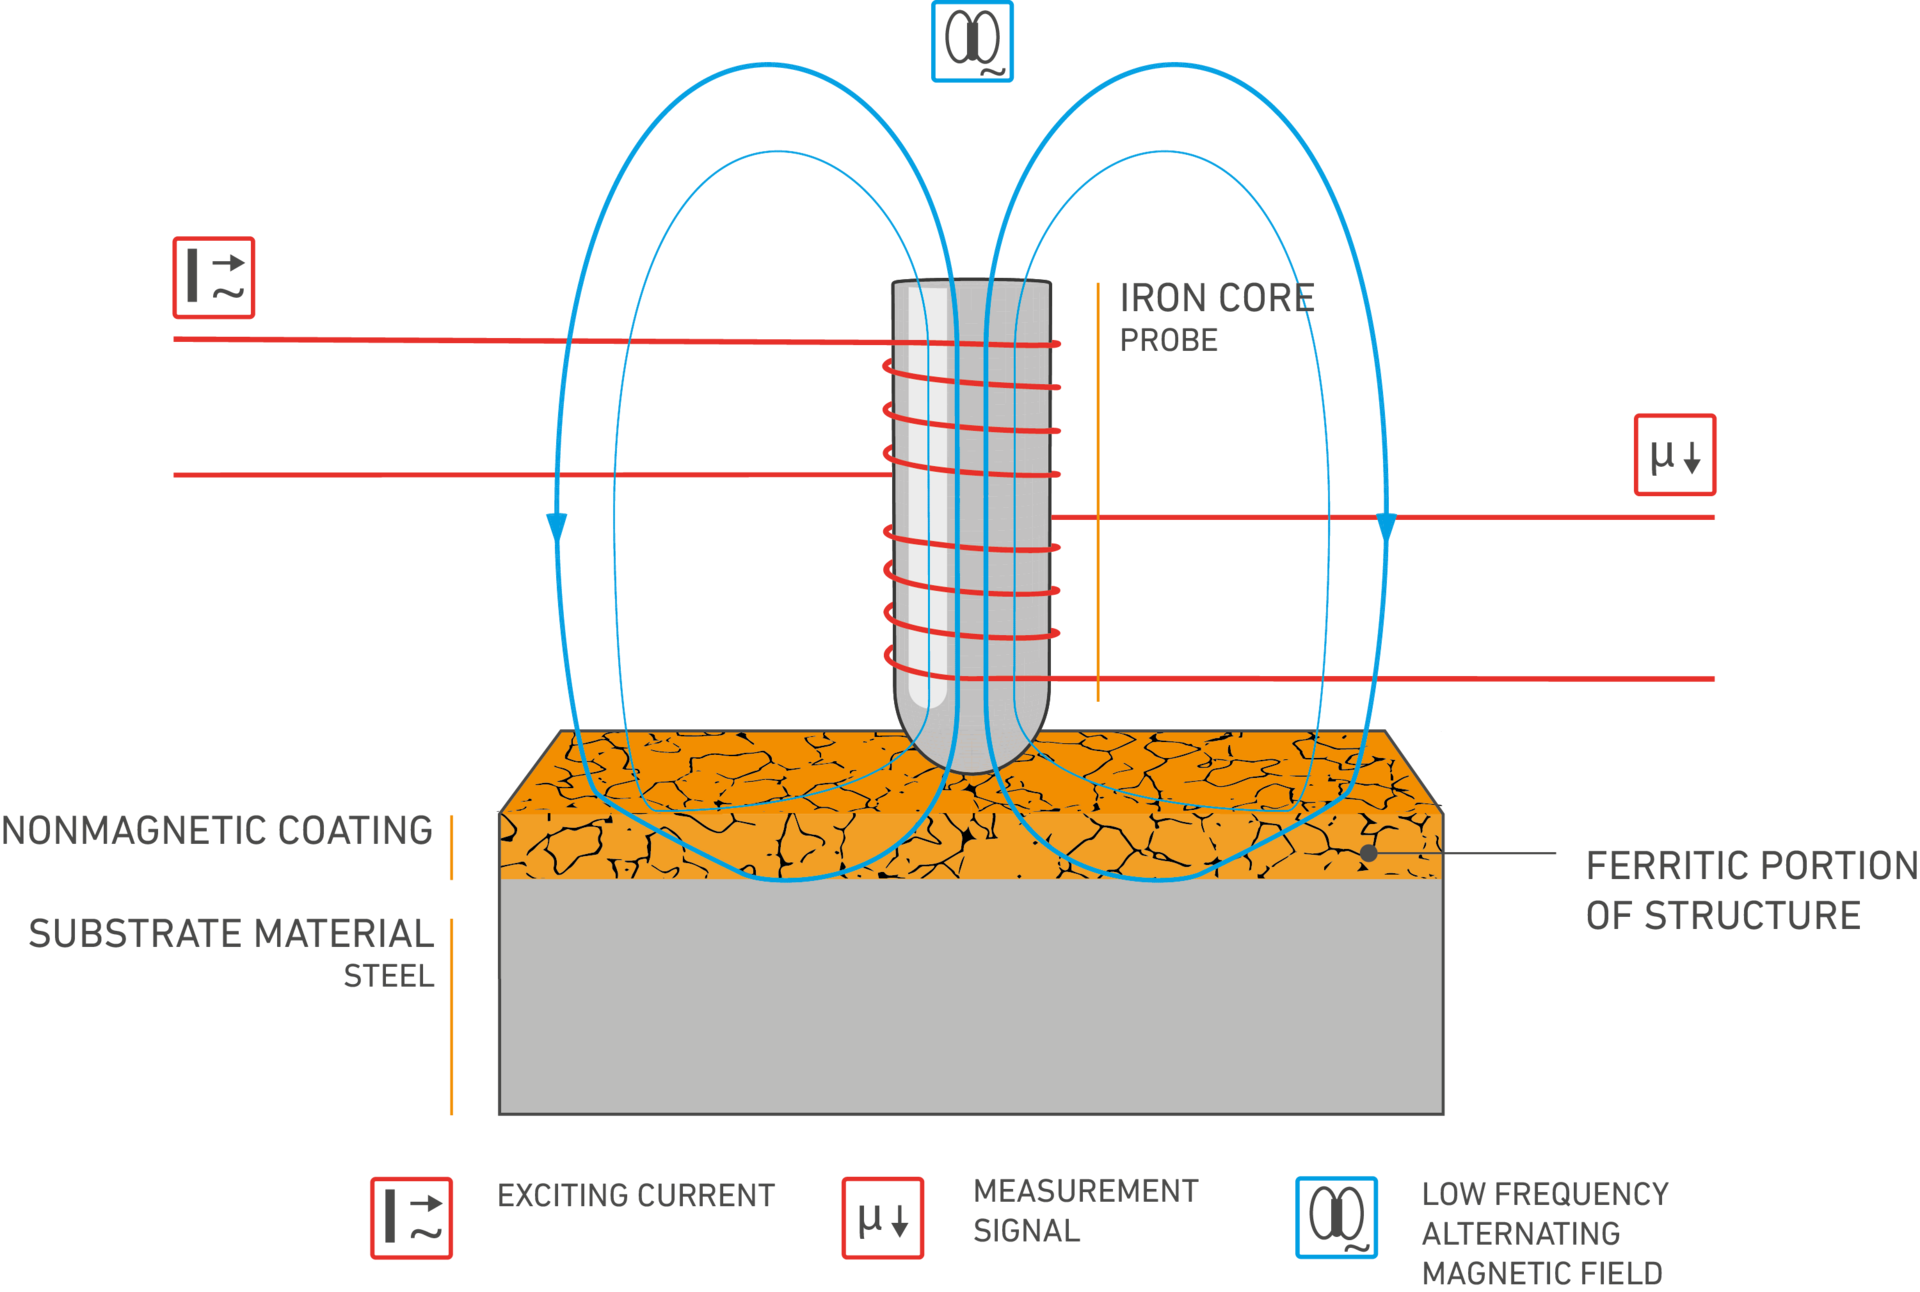 This is how ferrite content measurement works